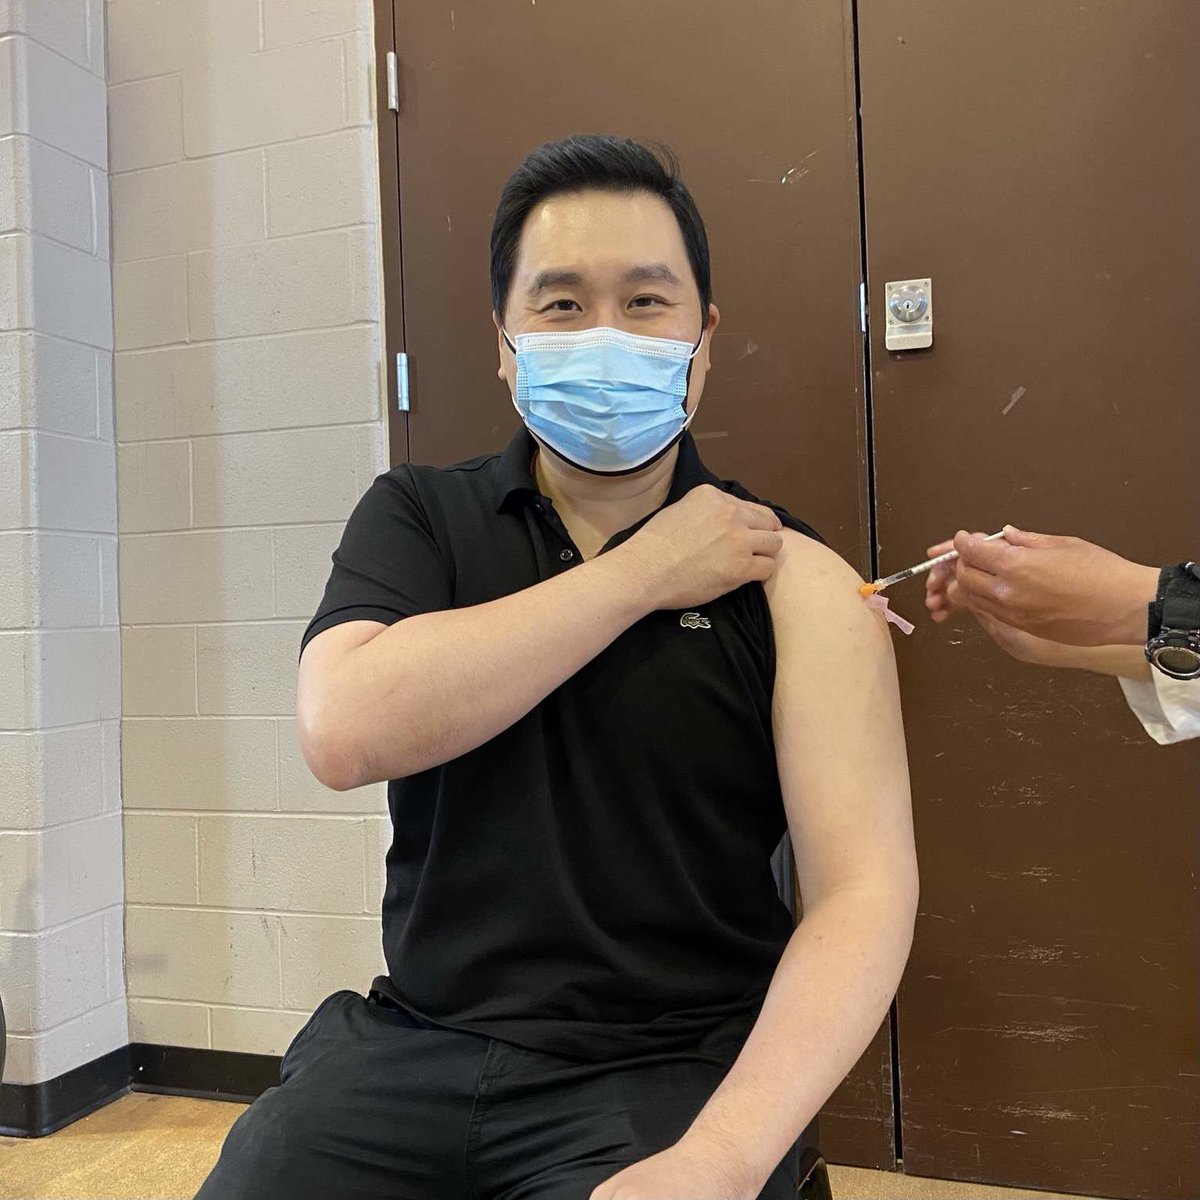 Fully vaxxed! Props to the amazing @SHNcares team running today’s Delta hot spot vaccine clinic @CCCGT in #ScarbTO North that was efficient & effectively organized - more #SecondDose pop-ups available this week…check dates, times & locations at: scarbvaccine.ca